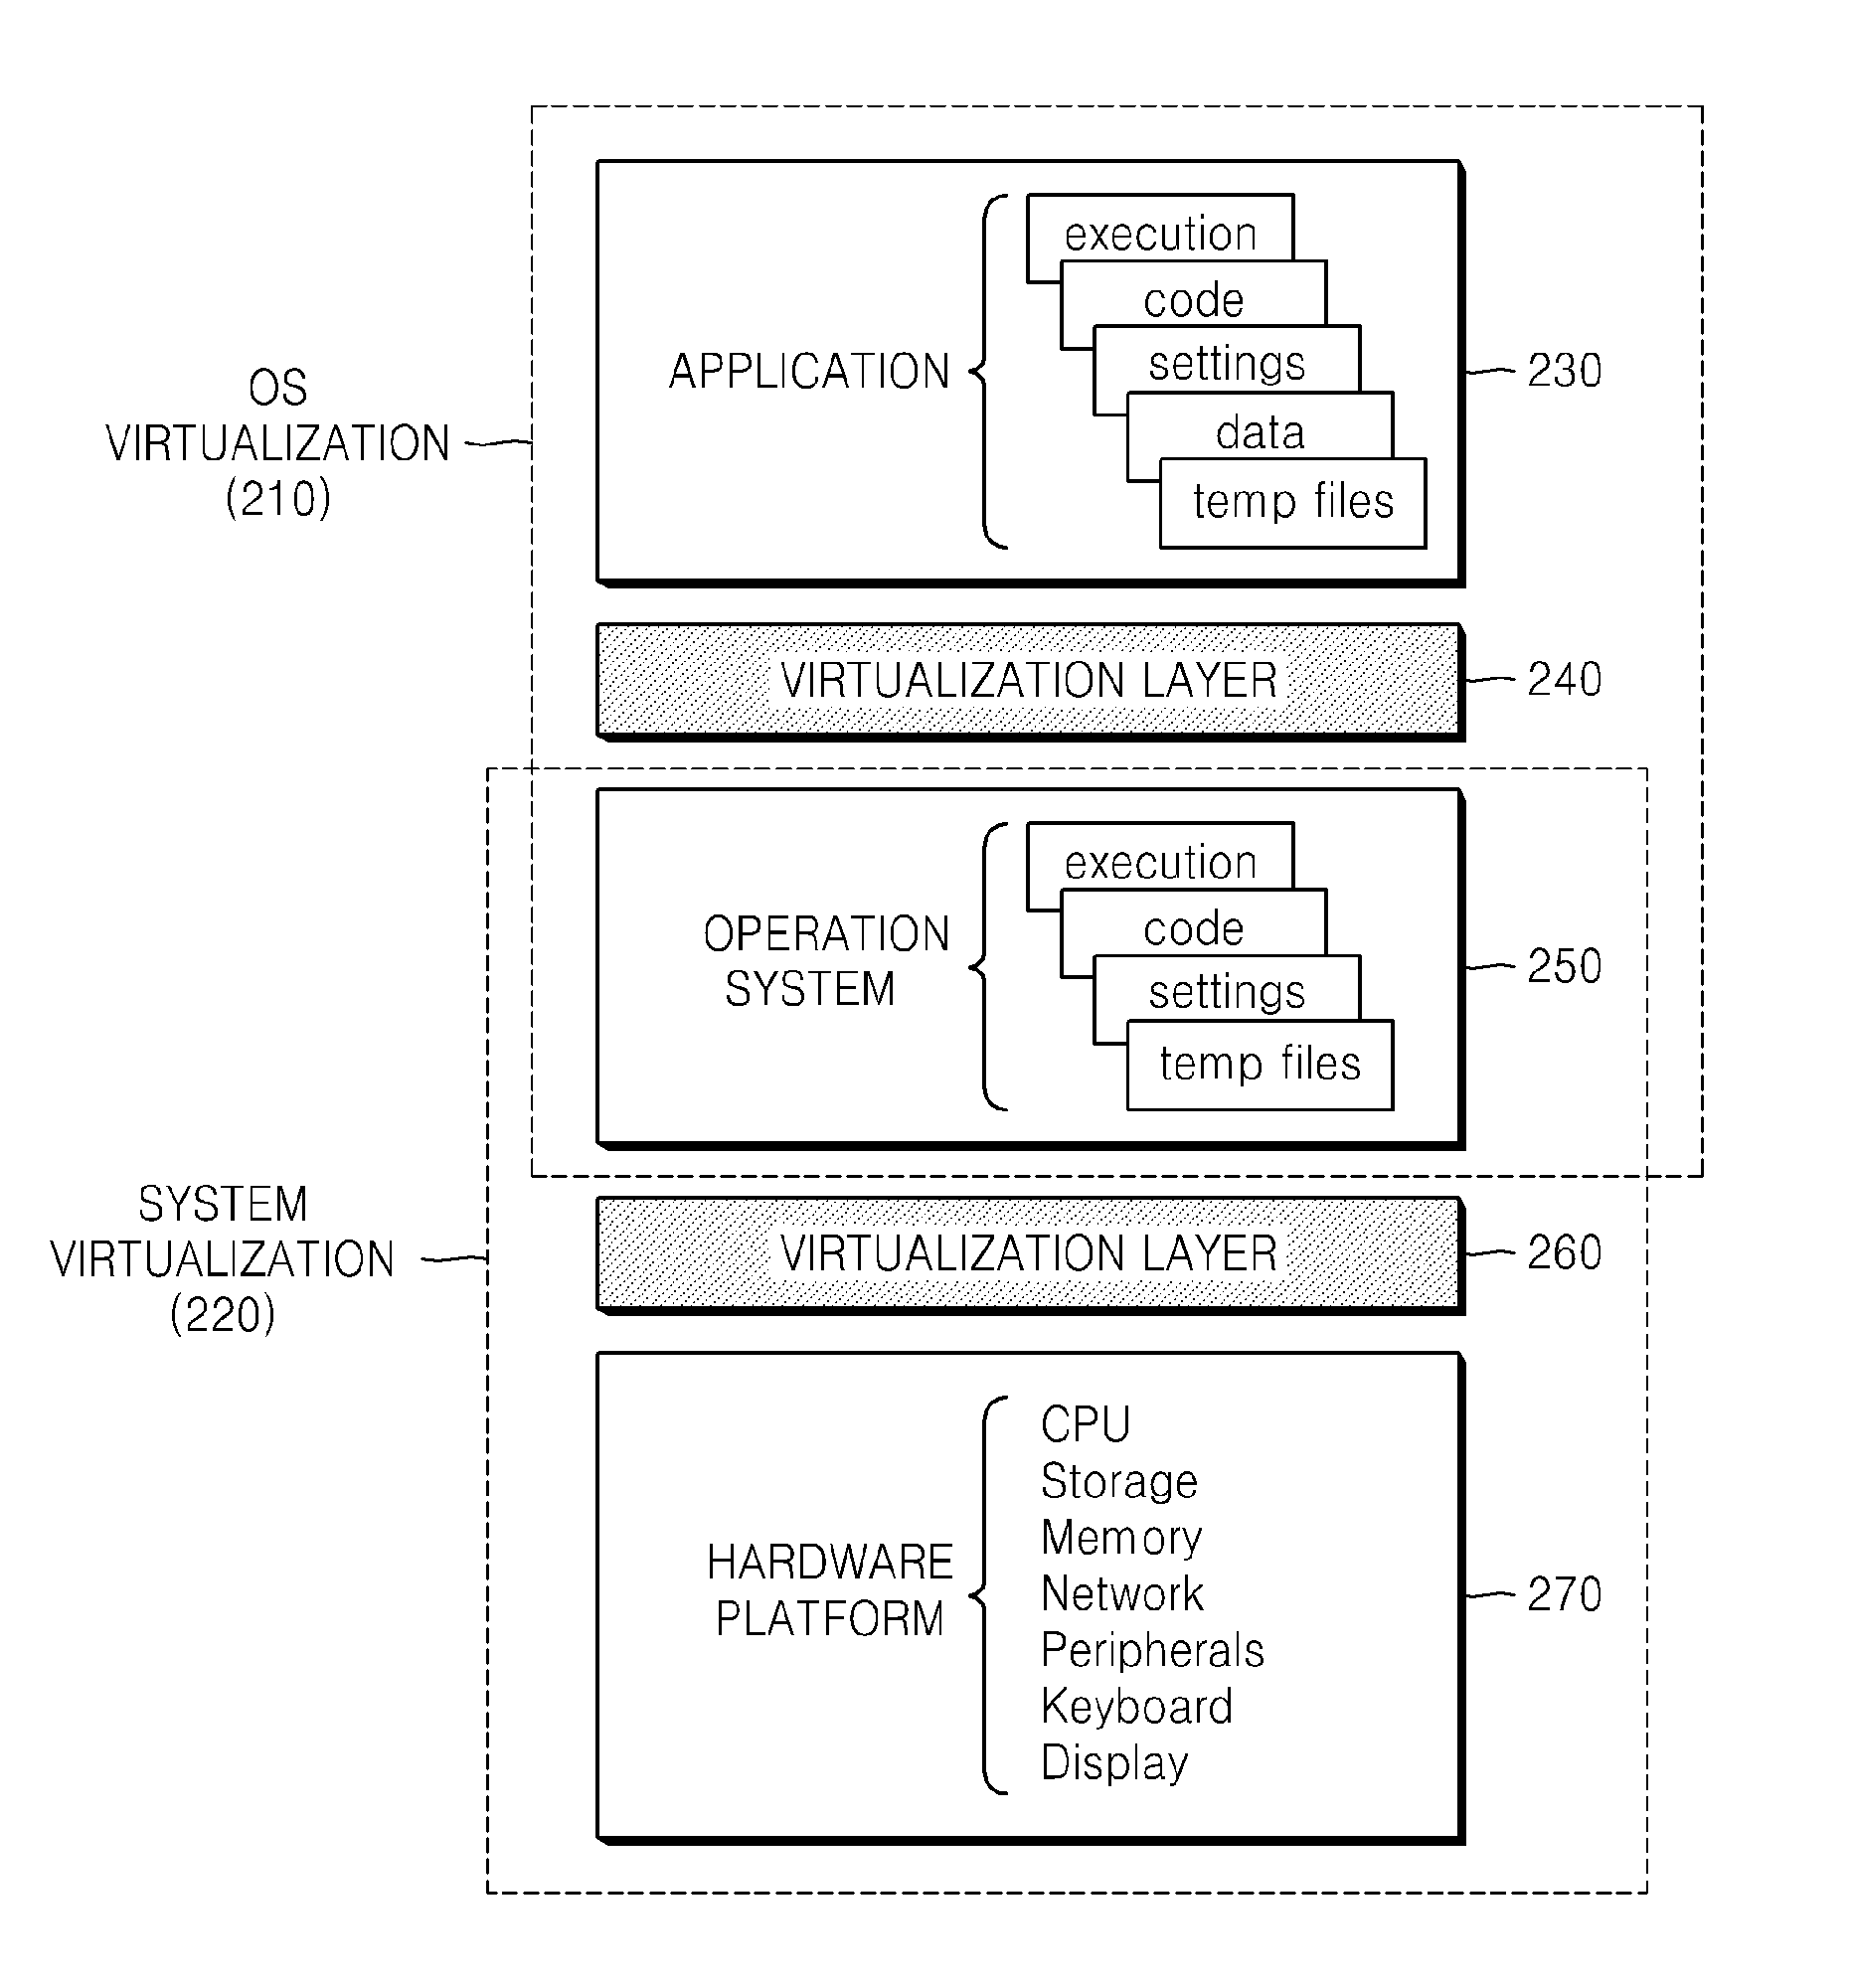 Method of mutually authenticating between software mobility device and local host and a method of forming input/output (i/o) channel